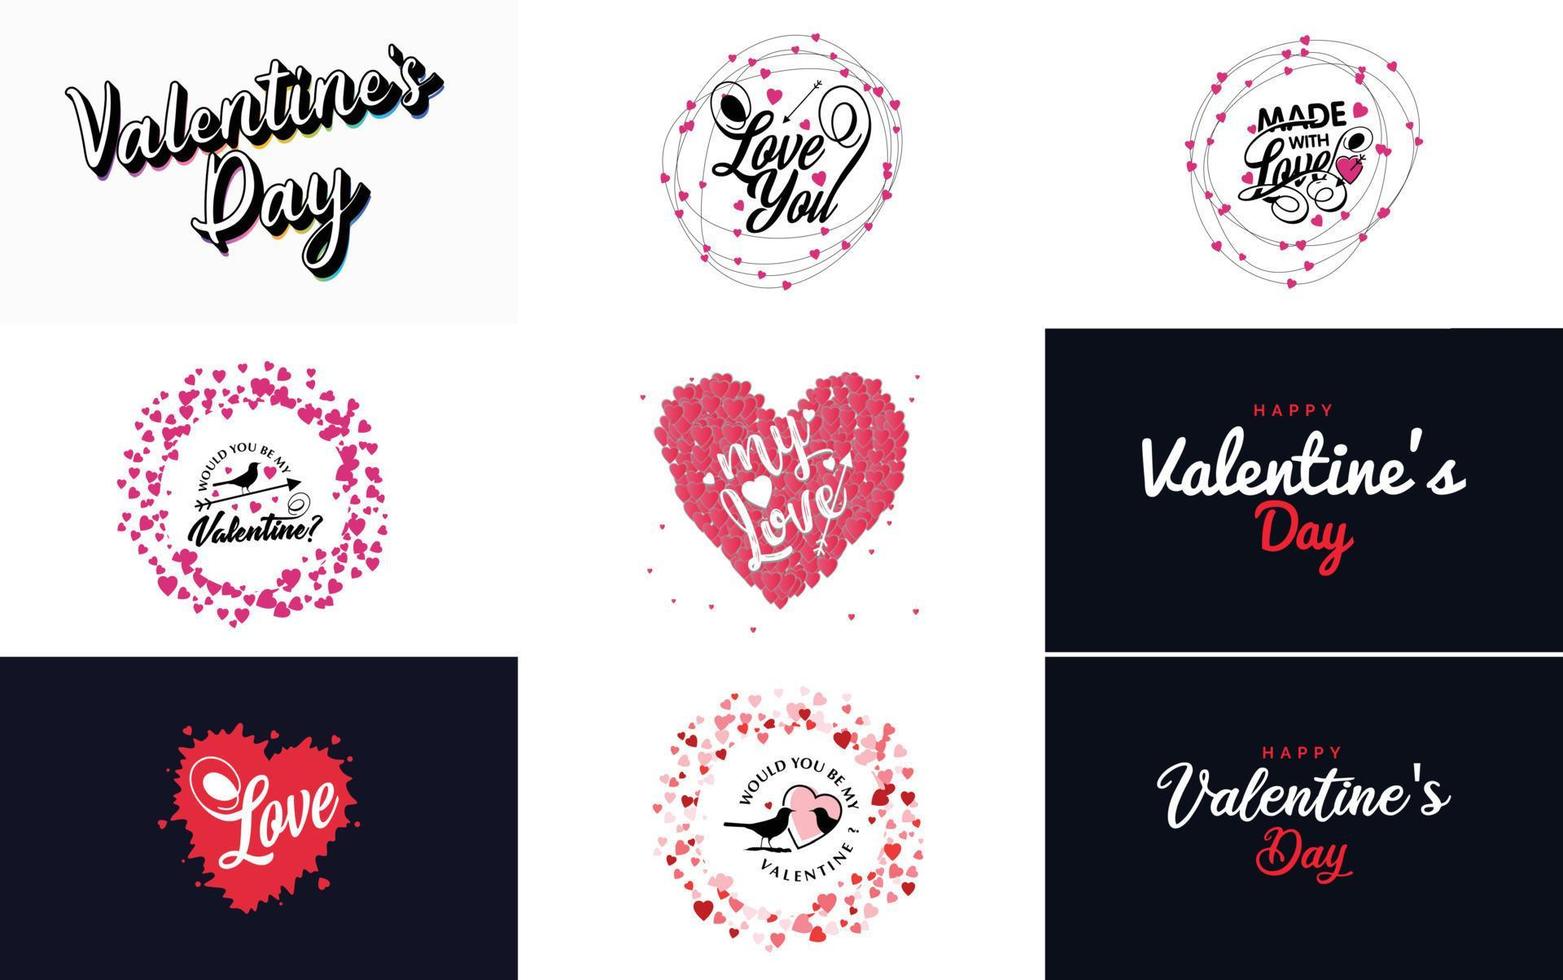 Happy Valentine's Day typography design with a heart-shaped wreath and a gradient color scheme vector